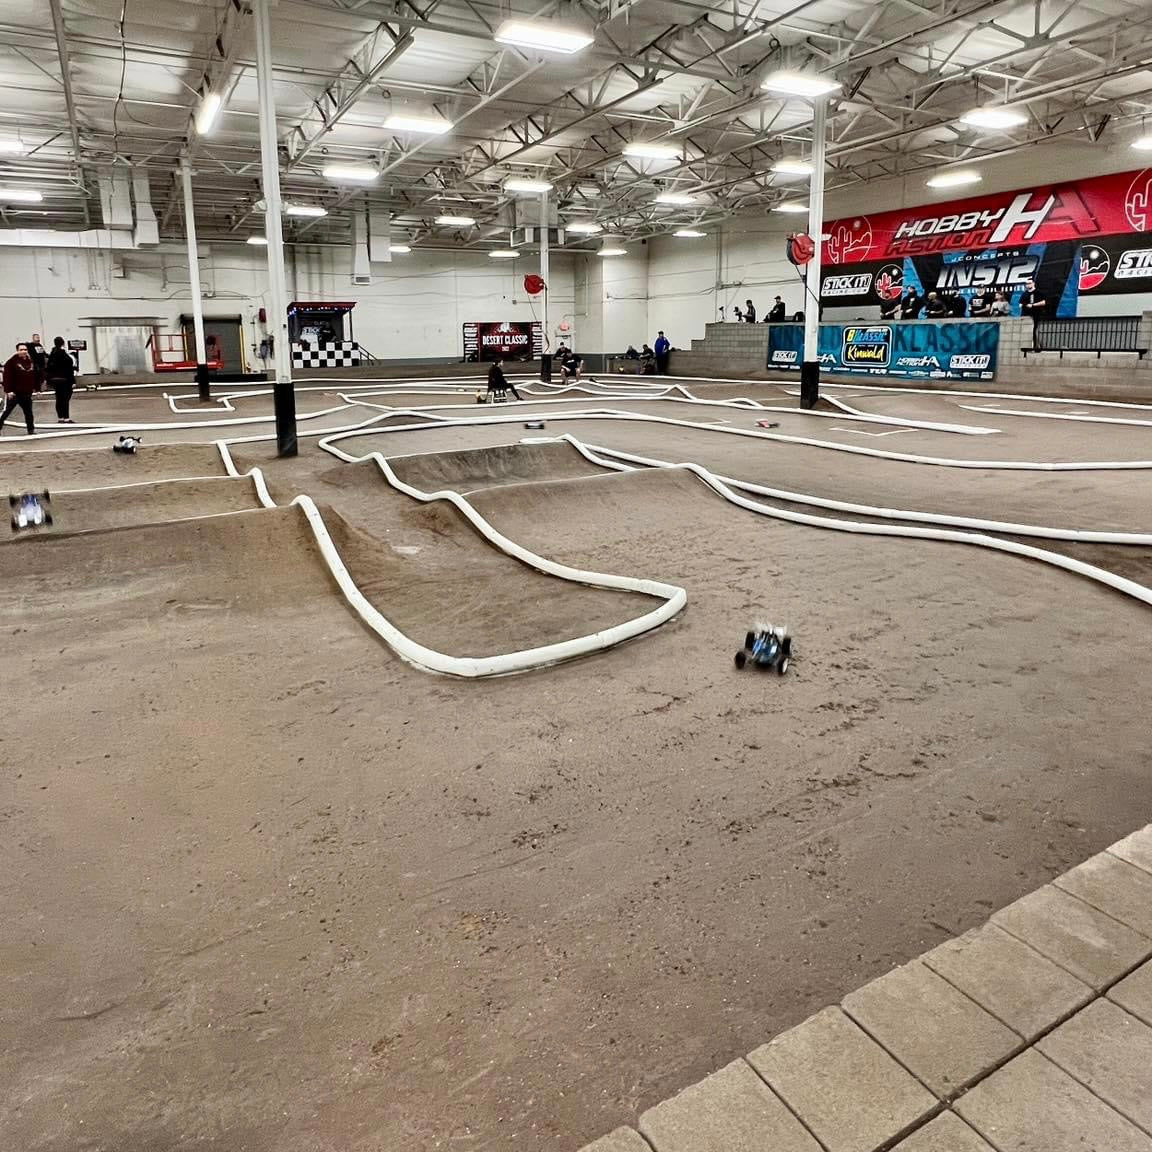 1up Racing in the house at Hobby Action R/C Raceway